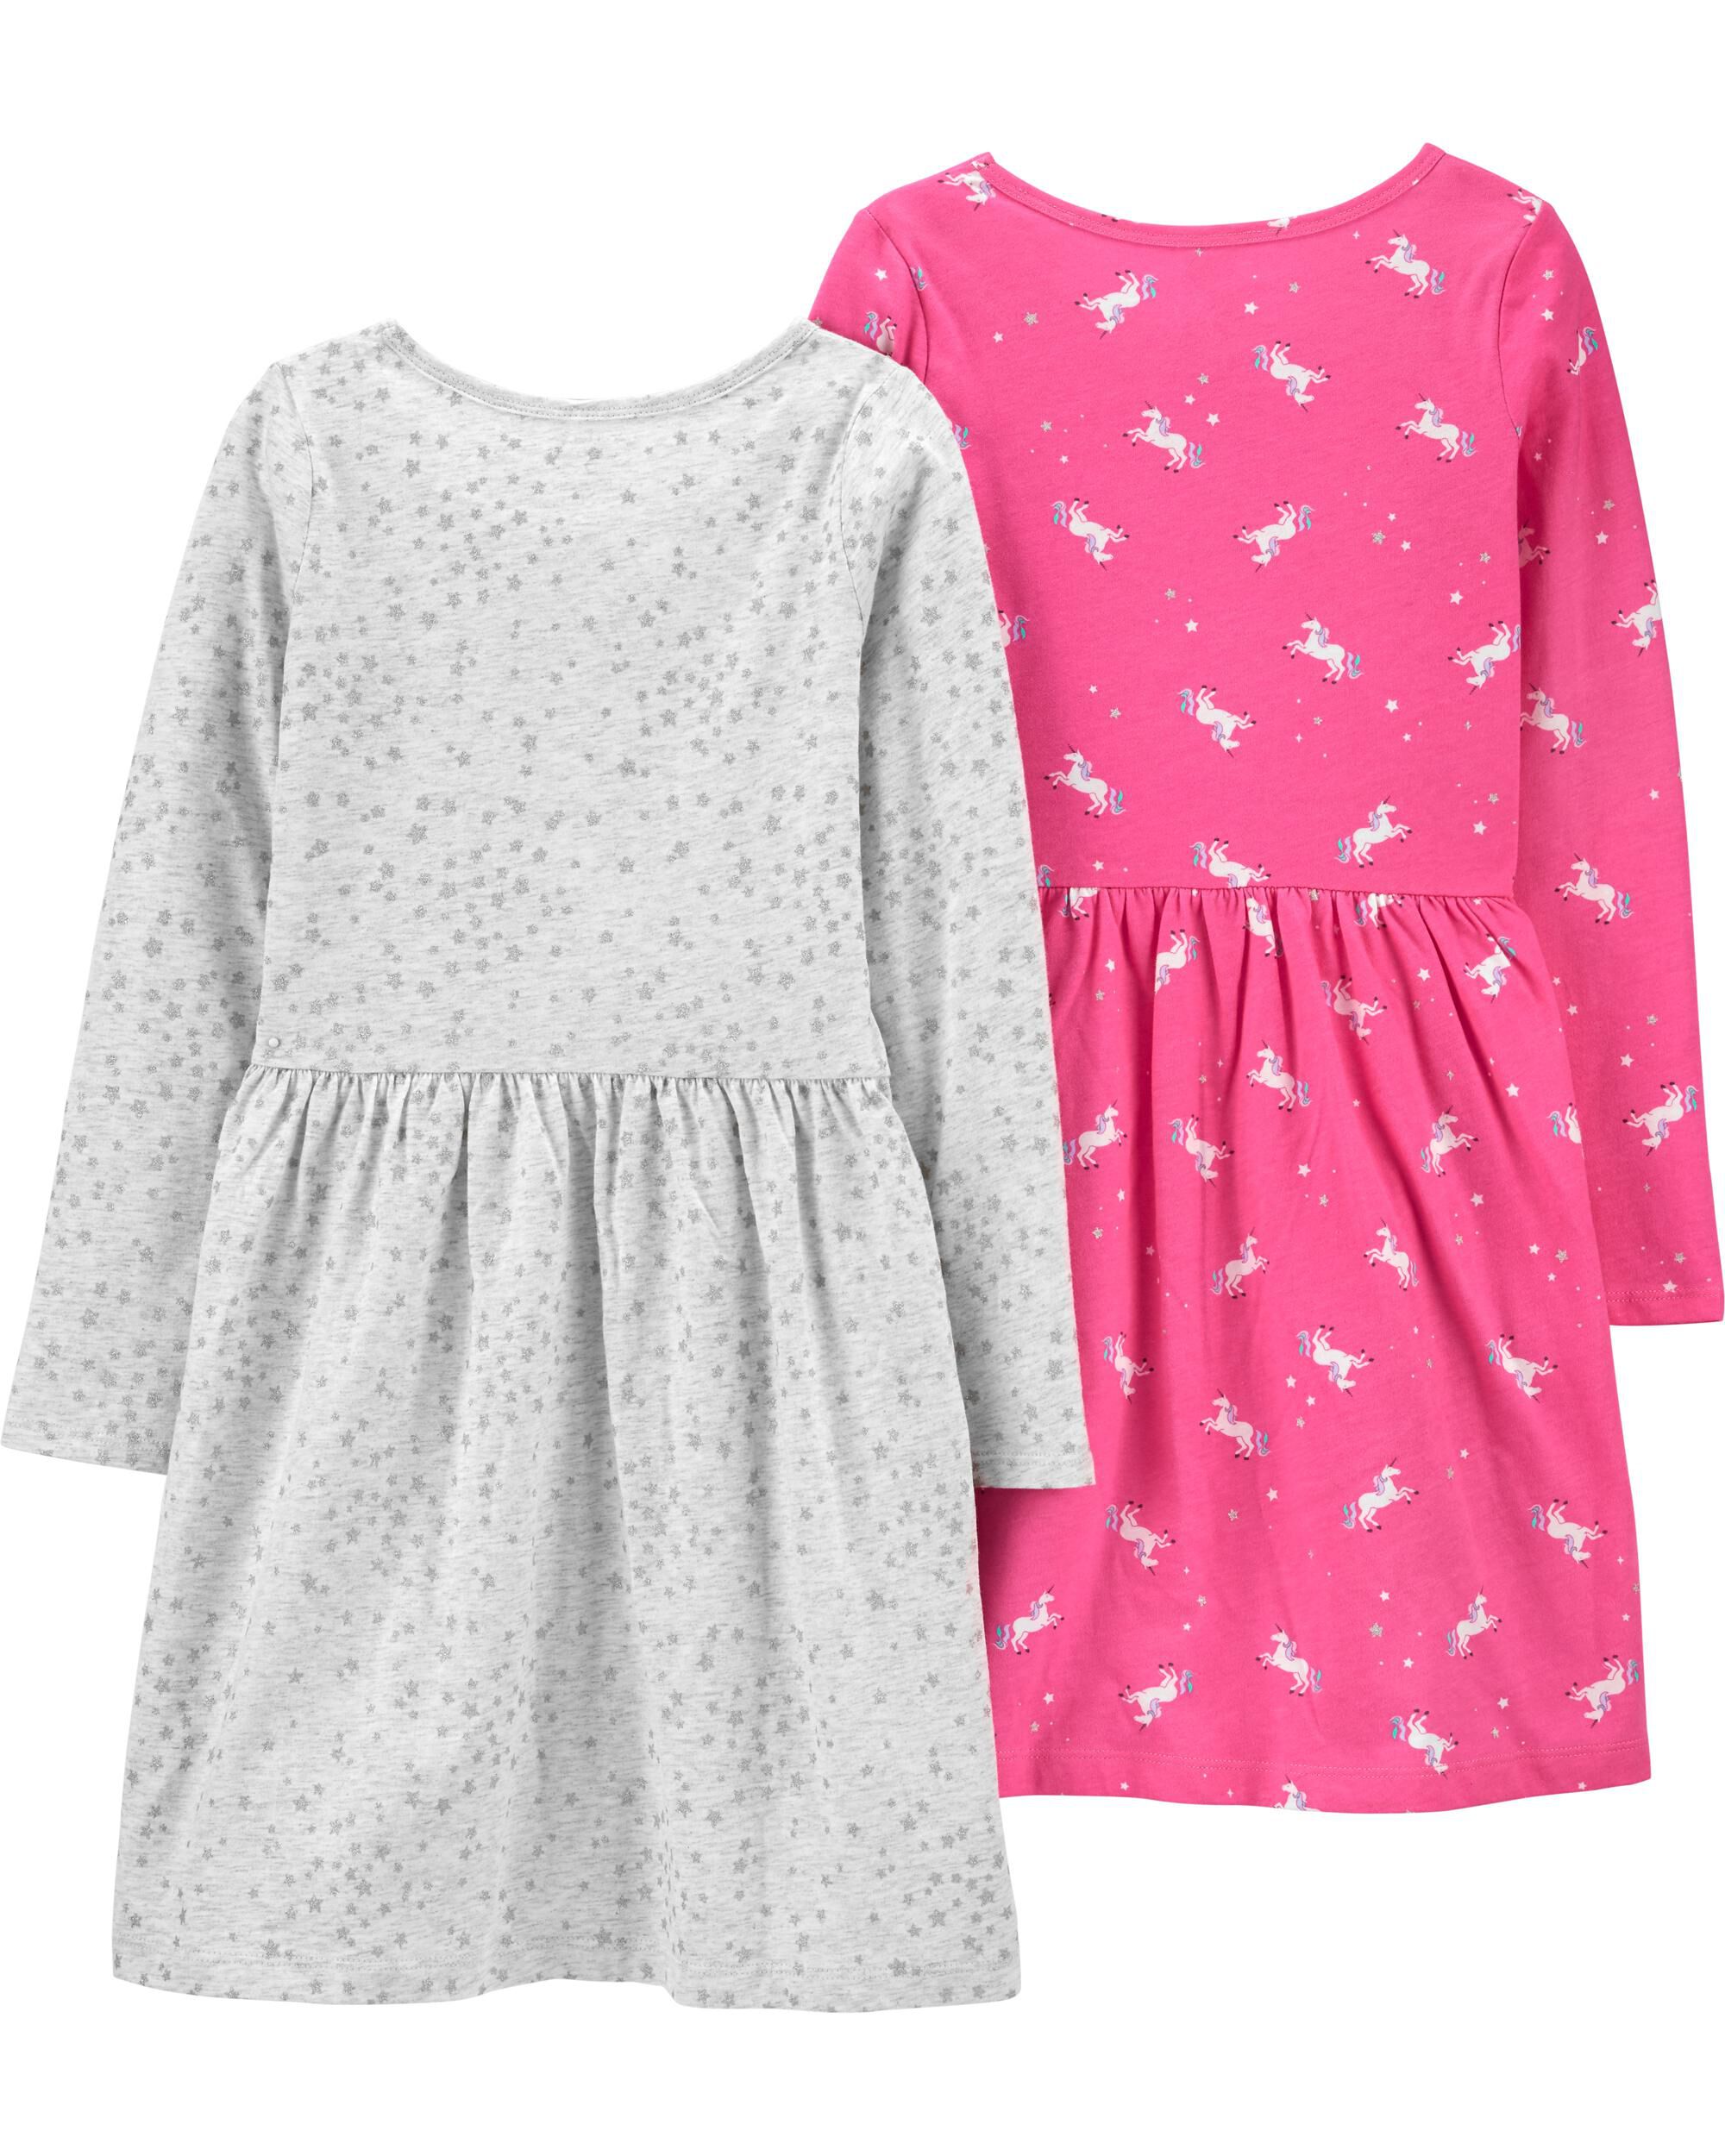 Simple Joys by Carters Girls Toddler 2-Pack Long-Sleeve Dress Set 3T Floral//horses